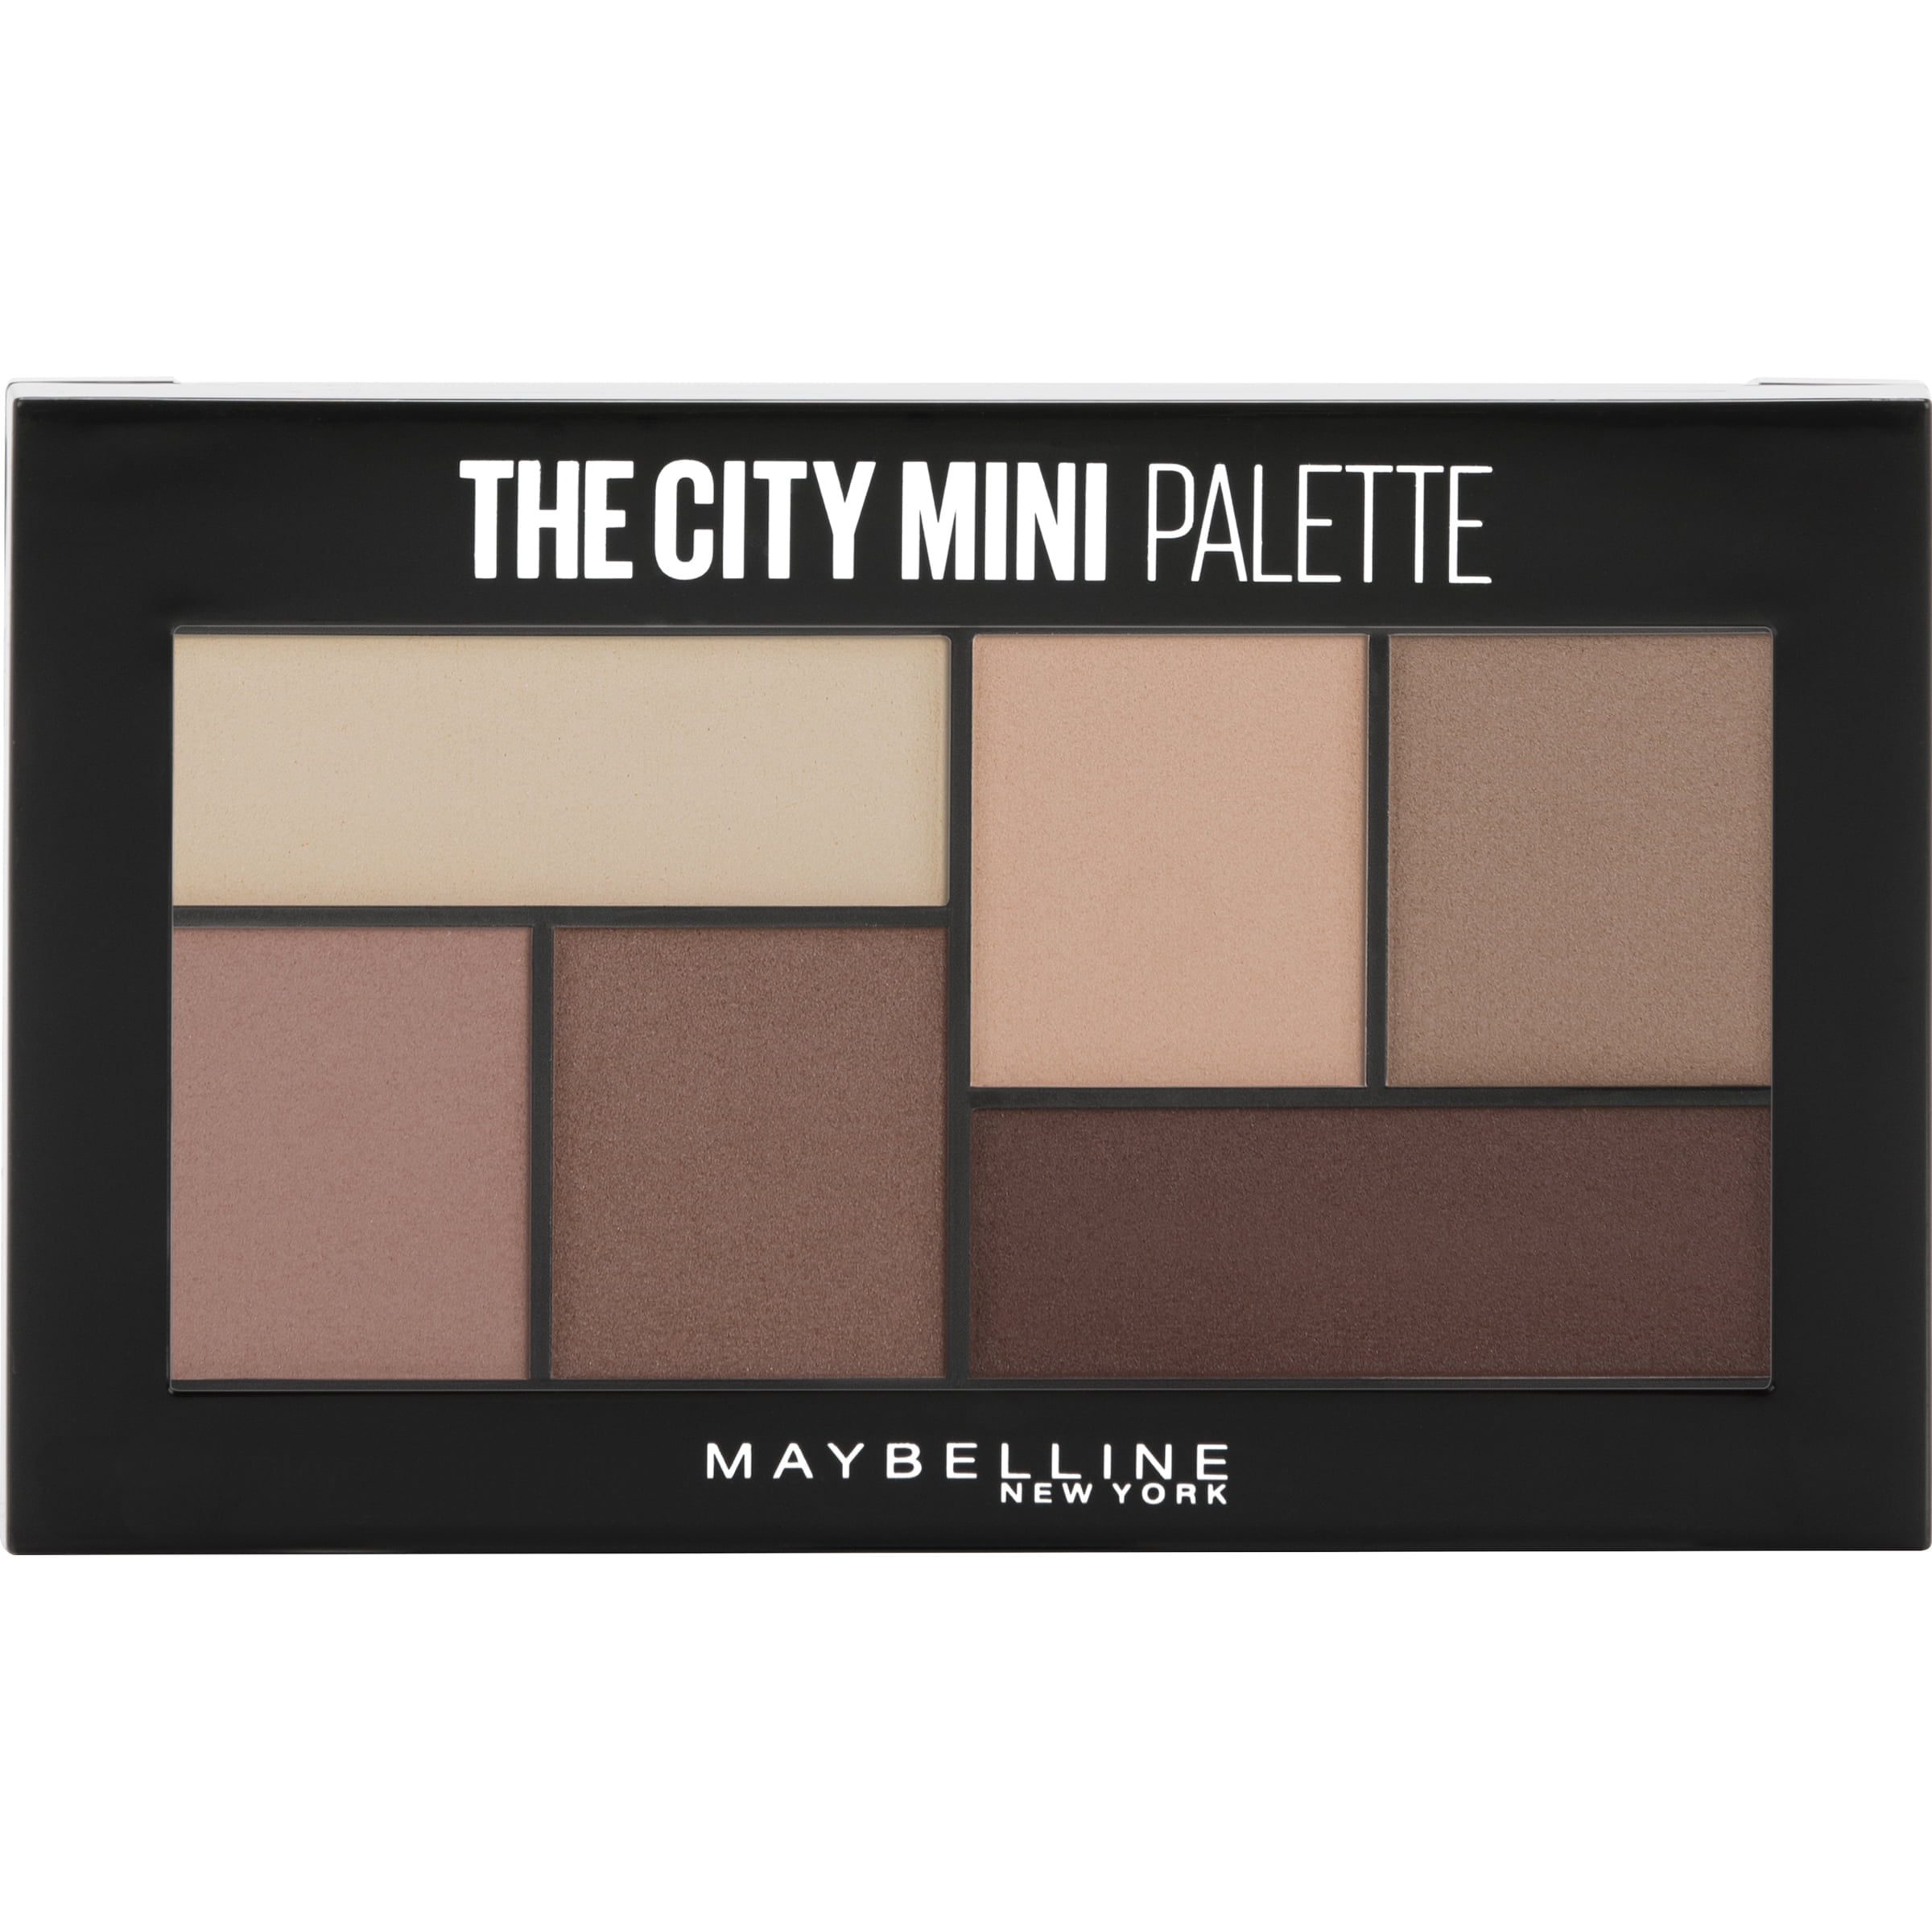 Maybelline The City Mini Eyeshadow Palette Makeup, Matte About Town, 0.14 oz